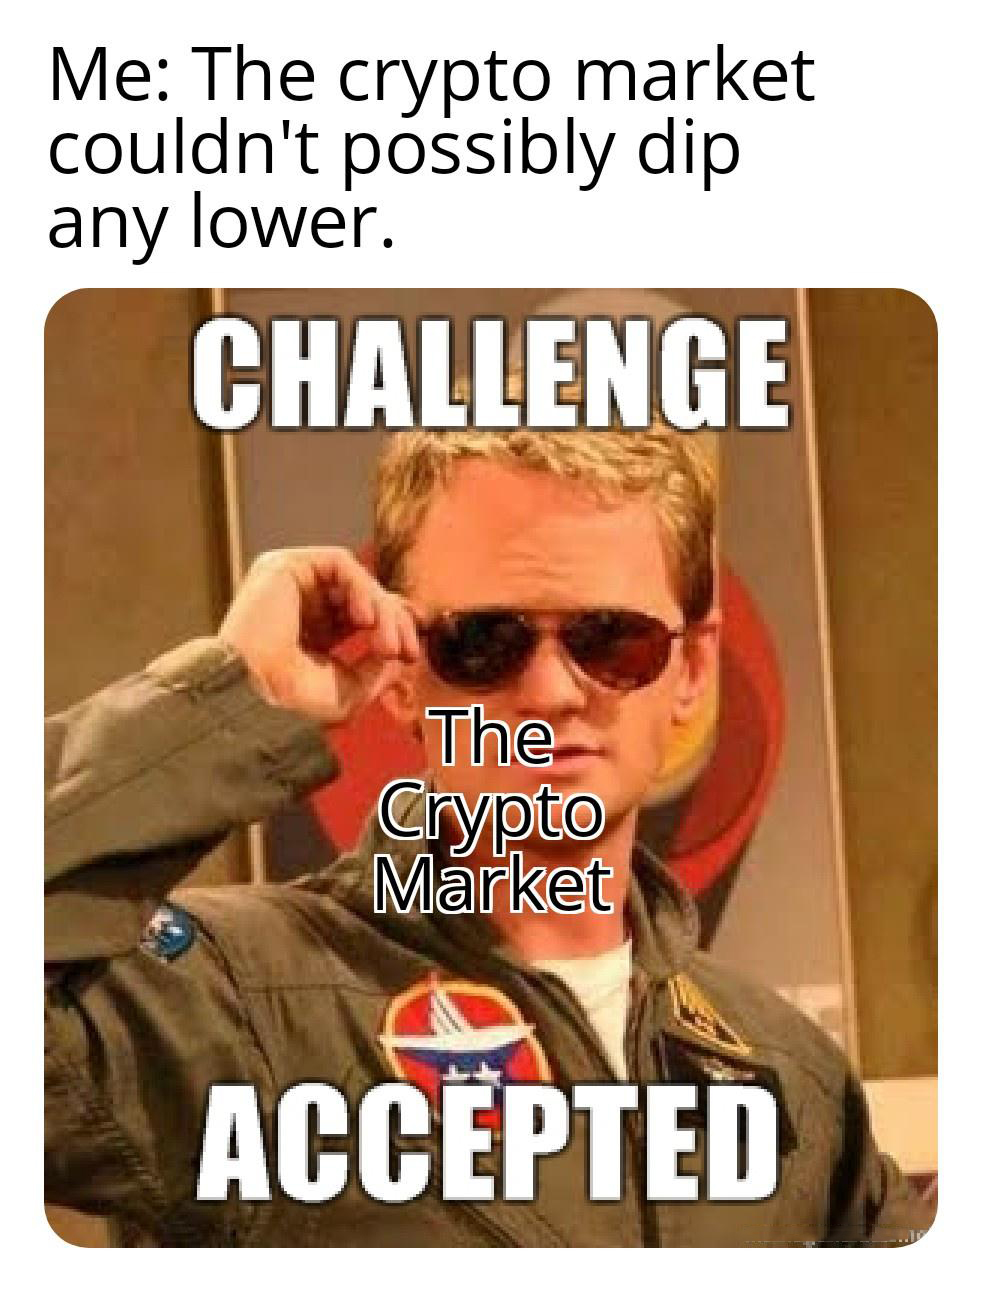 funny memes - dank memes - challenge accepted - Me The crypto market couldn't possibly dip any lower. Challenge The Crypto Market Accepted